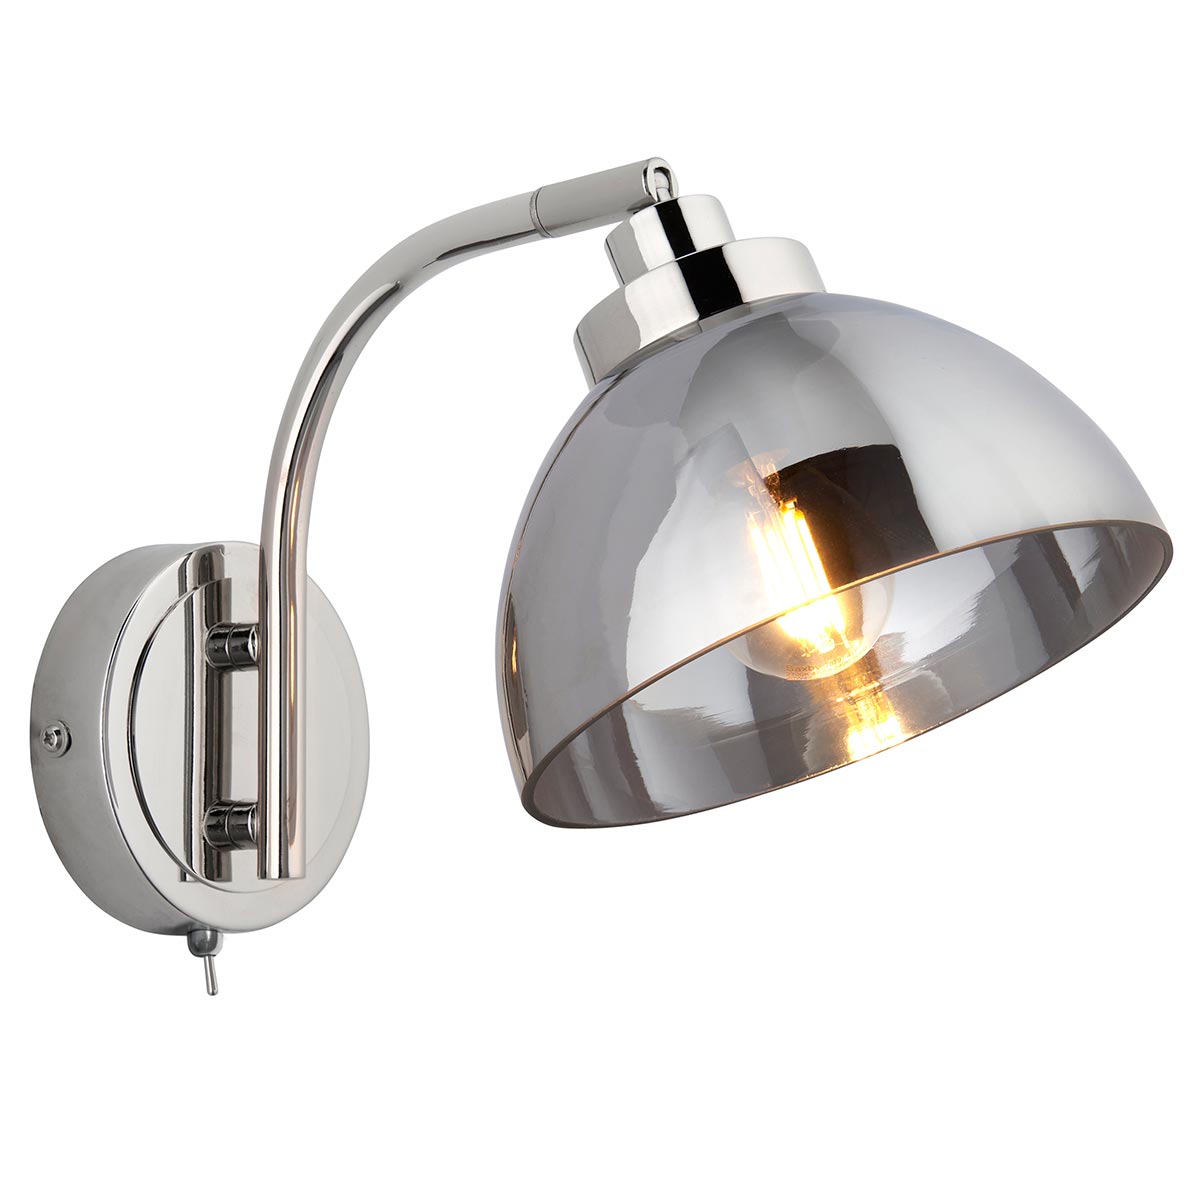 Endon Caspa Single Switched Wall Light Polished Nickel